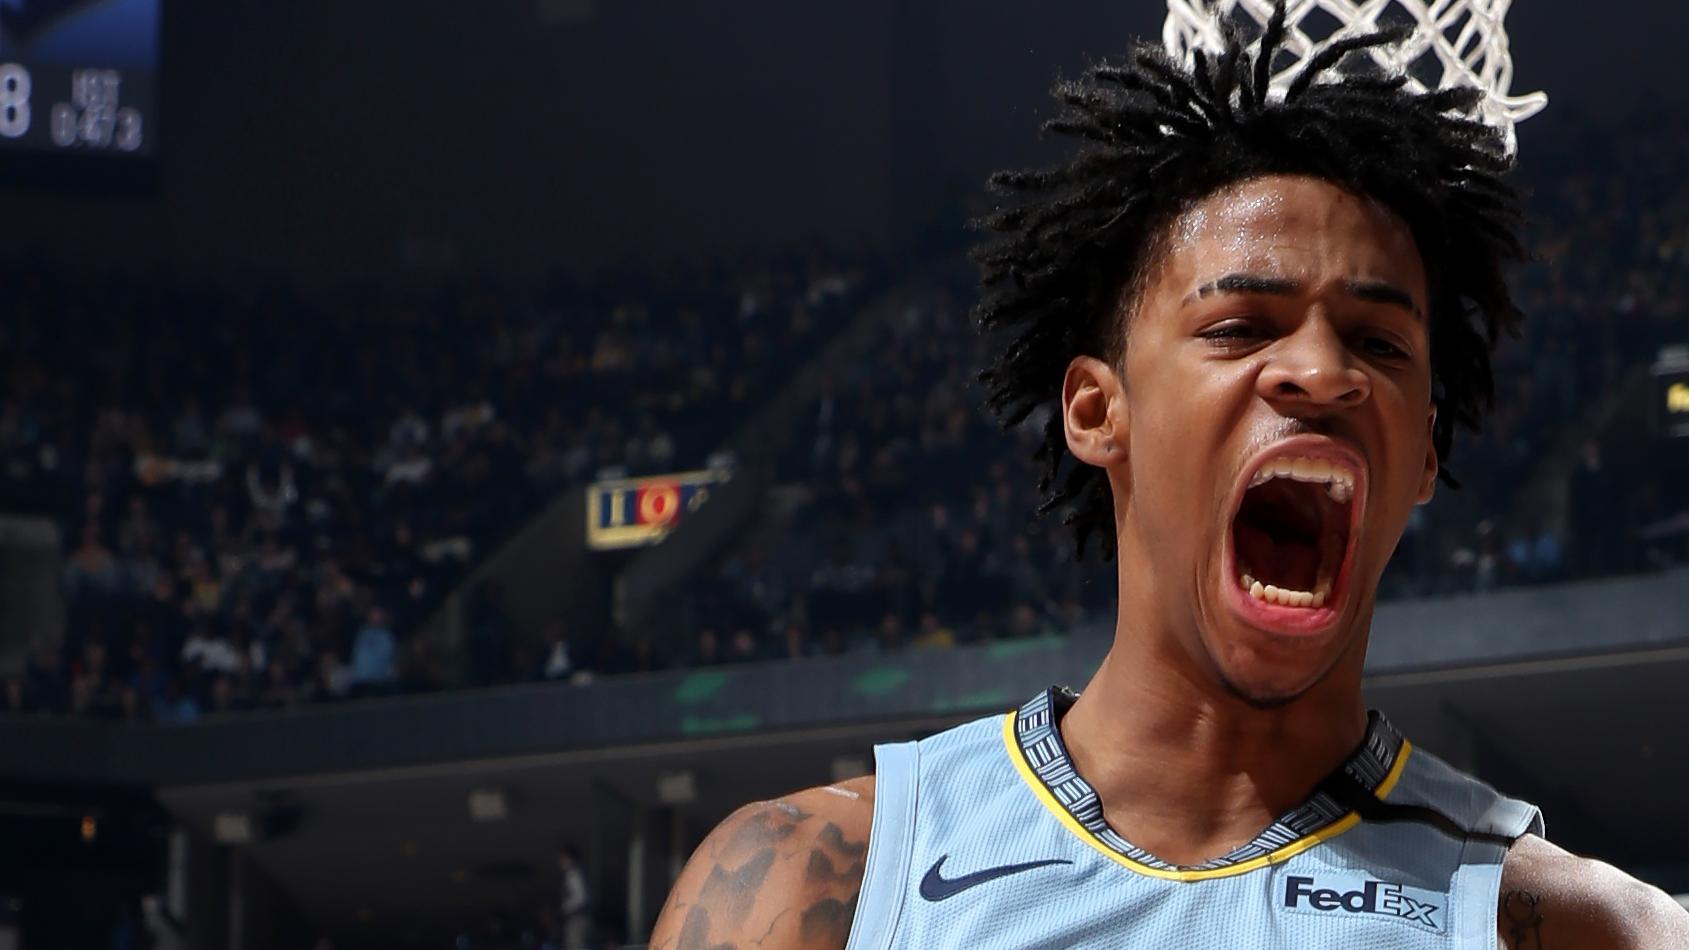 Morant has 27 points, 14 assists as Grizzlies defeat Lakers,  KSEE24